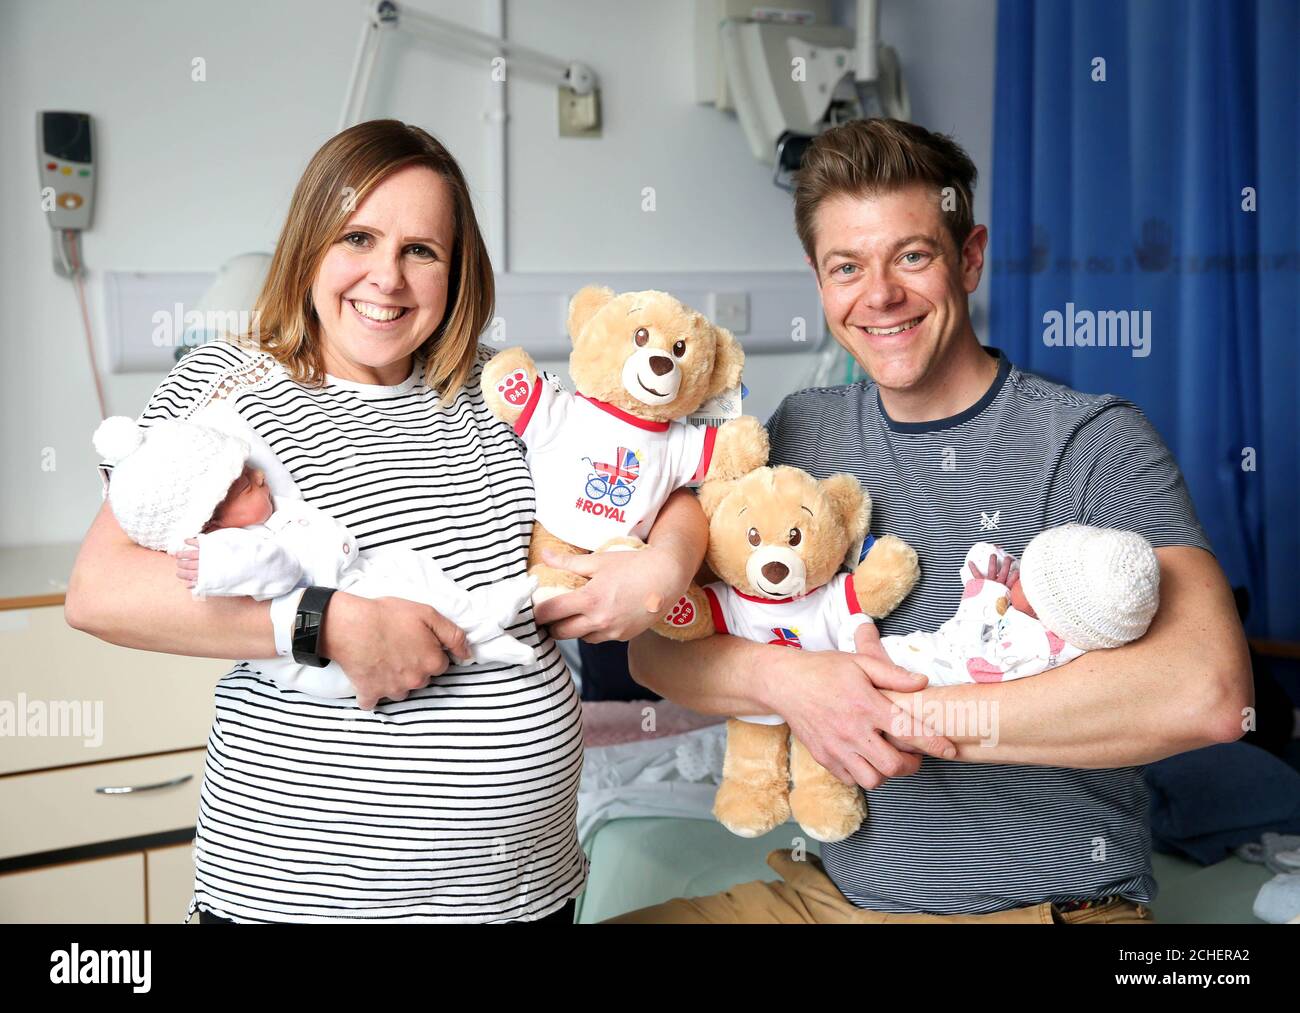 Carmen and Michael Barrett from Petersfield, with their daughters Sienna Rose (left) and Ava Grace and a toy bear at the Royal Surrey County Hospital in Guildford as the Build-A-Bear workshop celebrates the historic birth of the latest royal by delivering 1,000 bears to new-borns at 10 royal hospitals, infirmaries and maternity units across the UK. Stock Photo